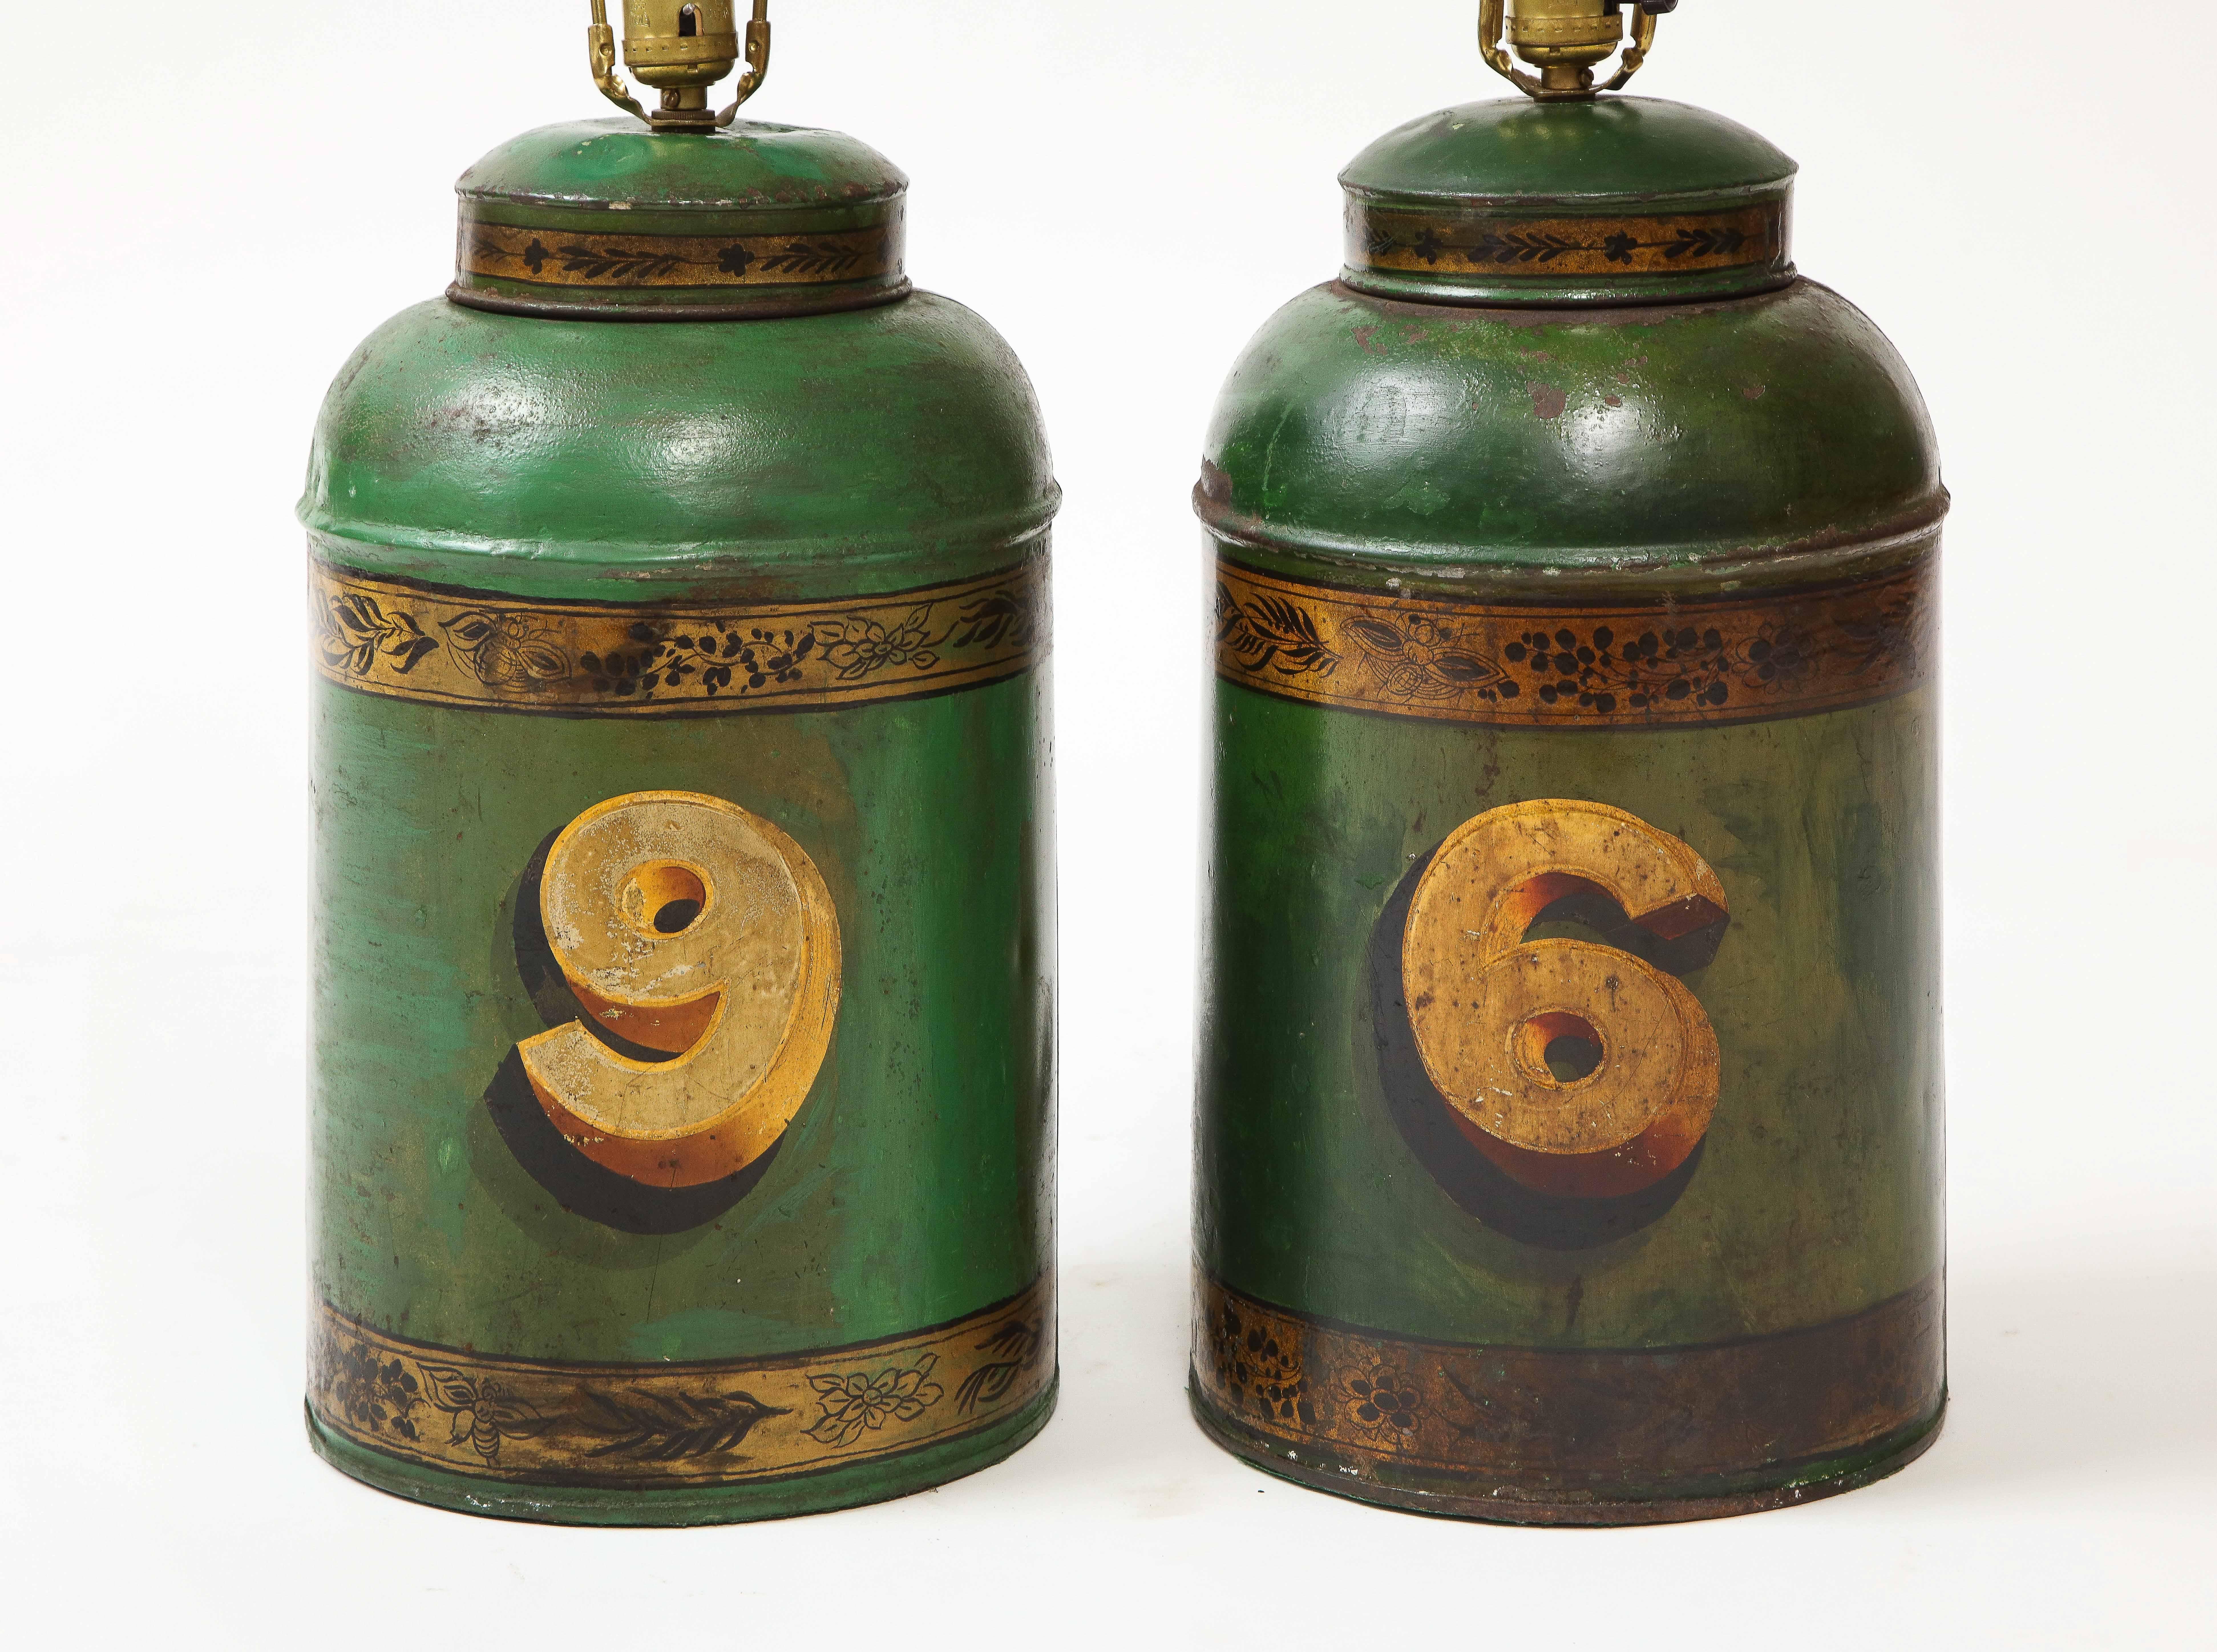 Chinoiserie Pair of English Green and Gilt Tôle Tea Canister Lamps